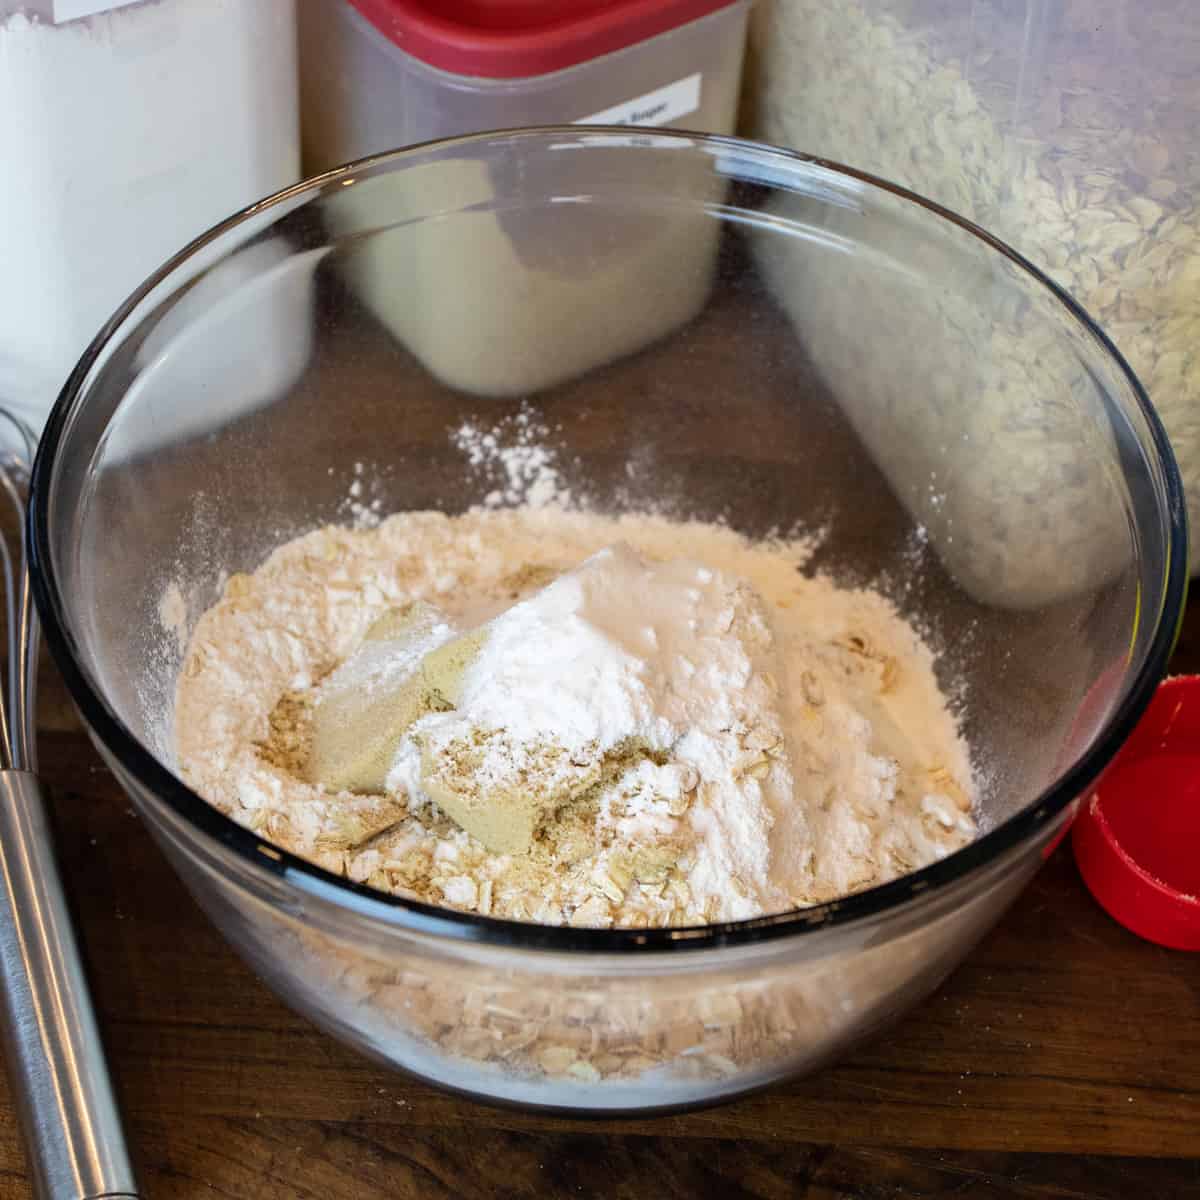 Dry ingredients dumped into a glass bowl.